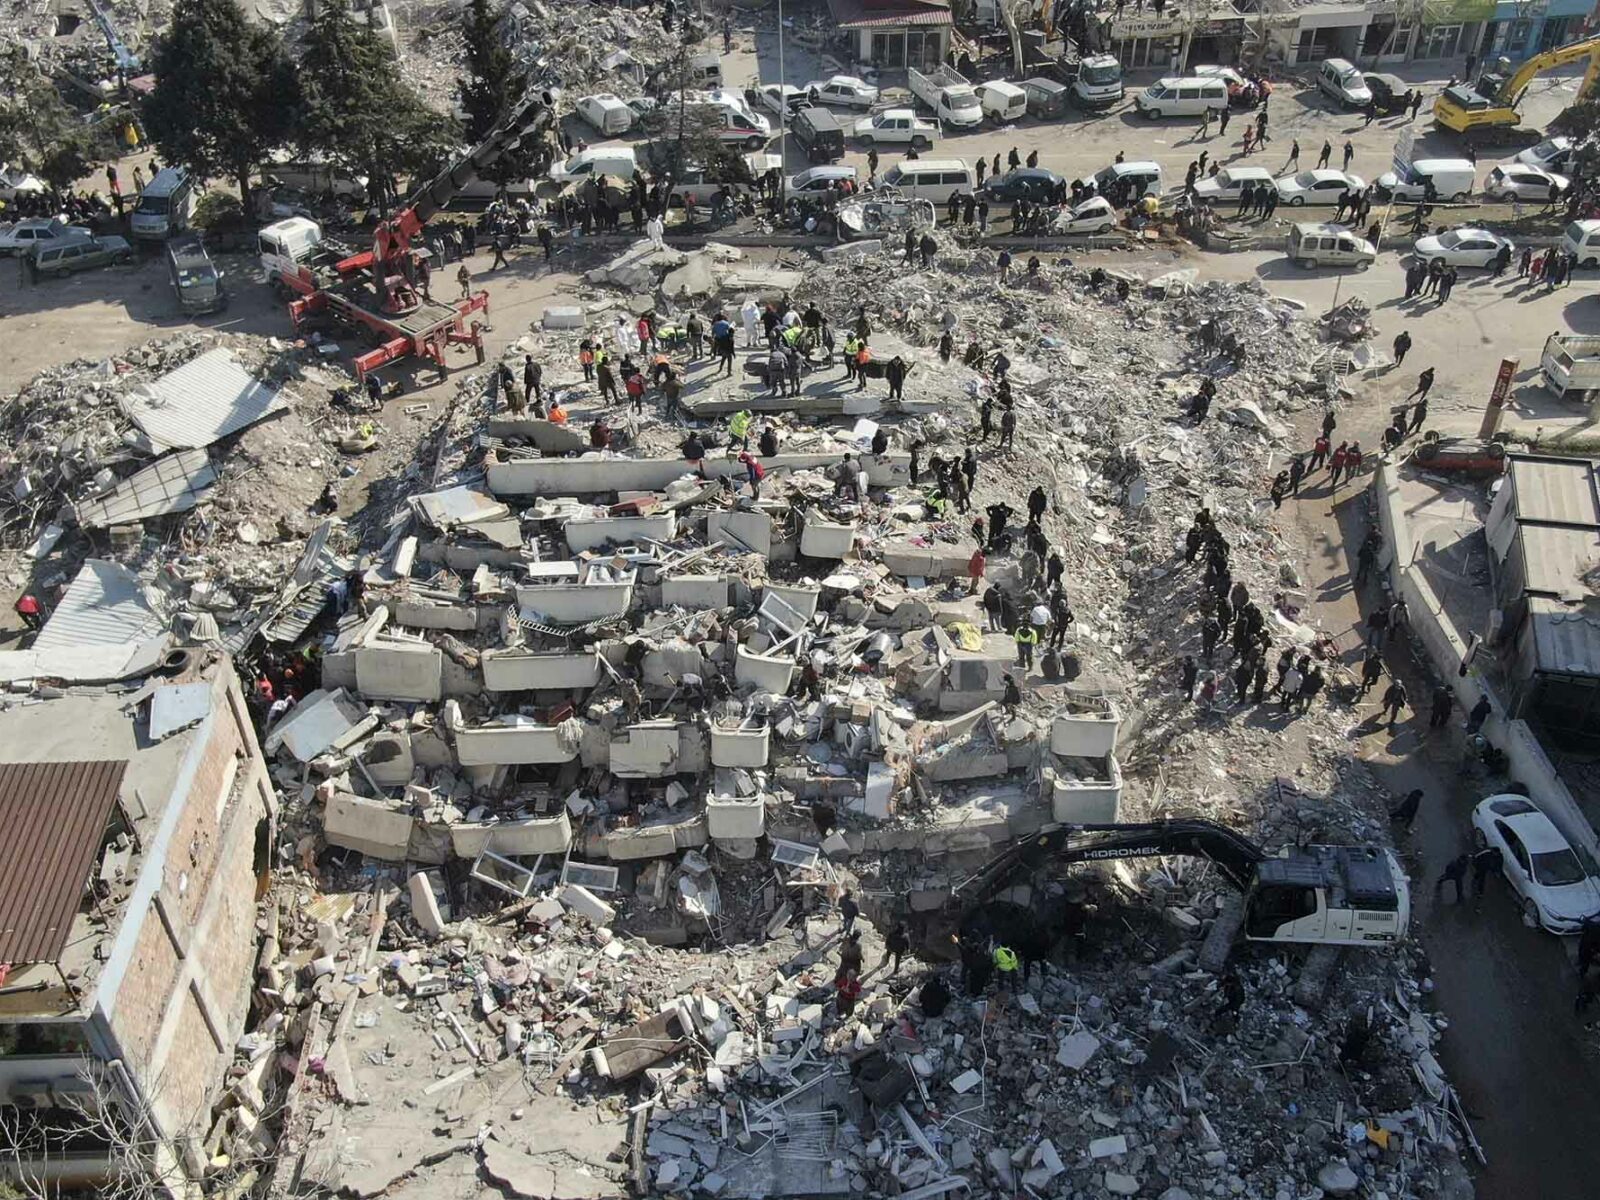 Why Were the Two Earthquakes That Struck Turkey and Syria So Catastrophic—and Could They Have Been Predicted? The Brink Boston University